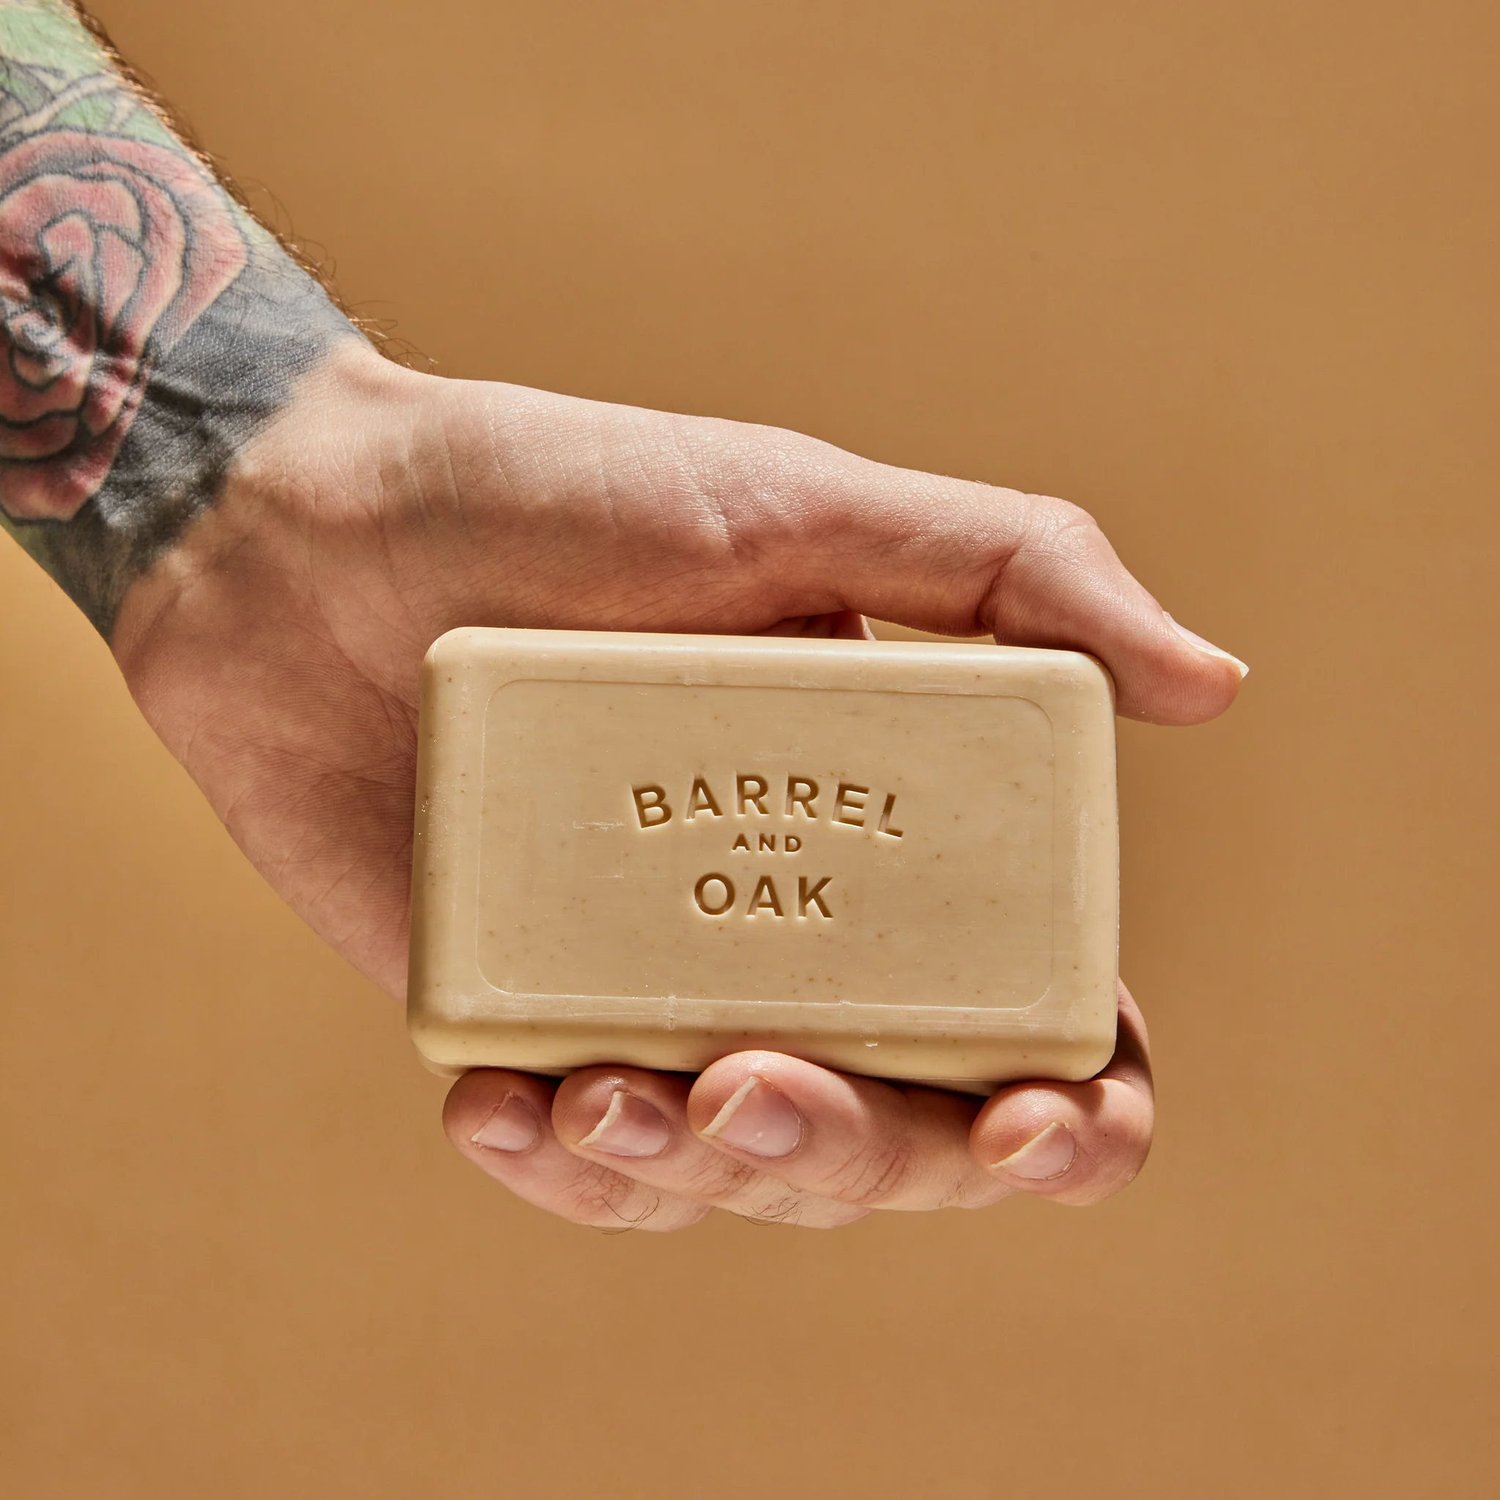 Barrel And Oak Spiced Sandalwood Bar Soap — Lost Objects, Found Treasures